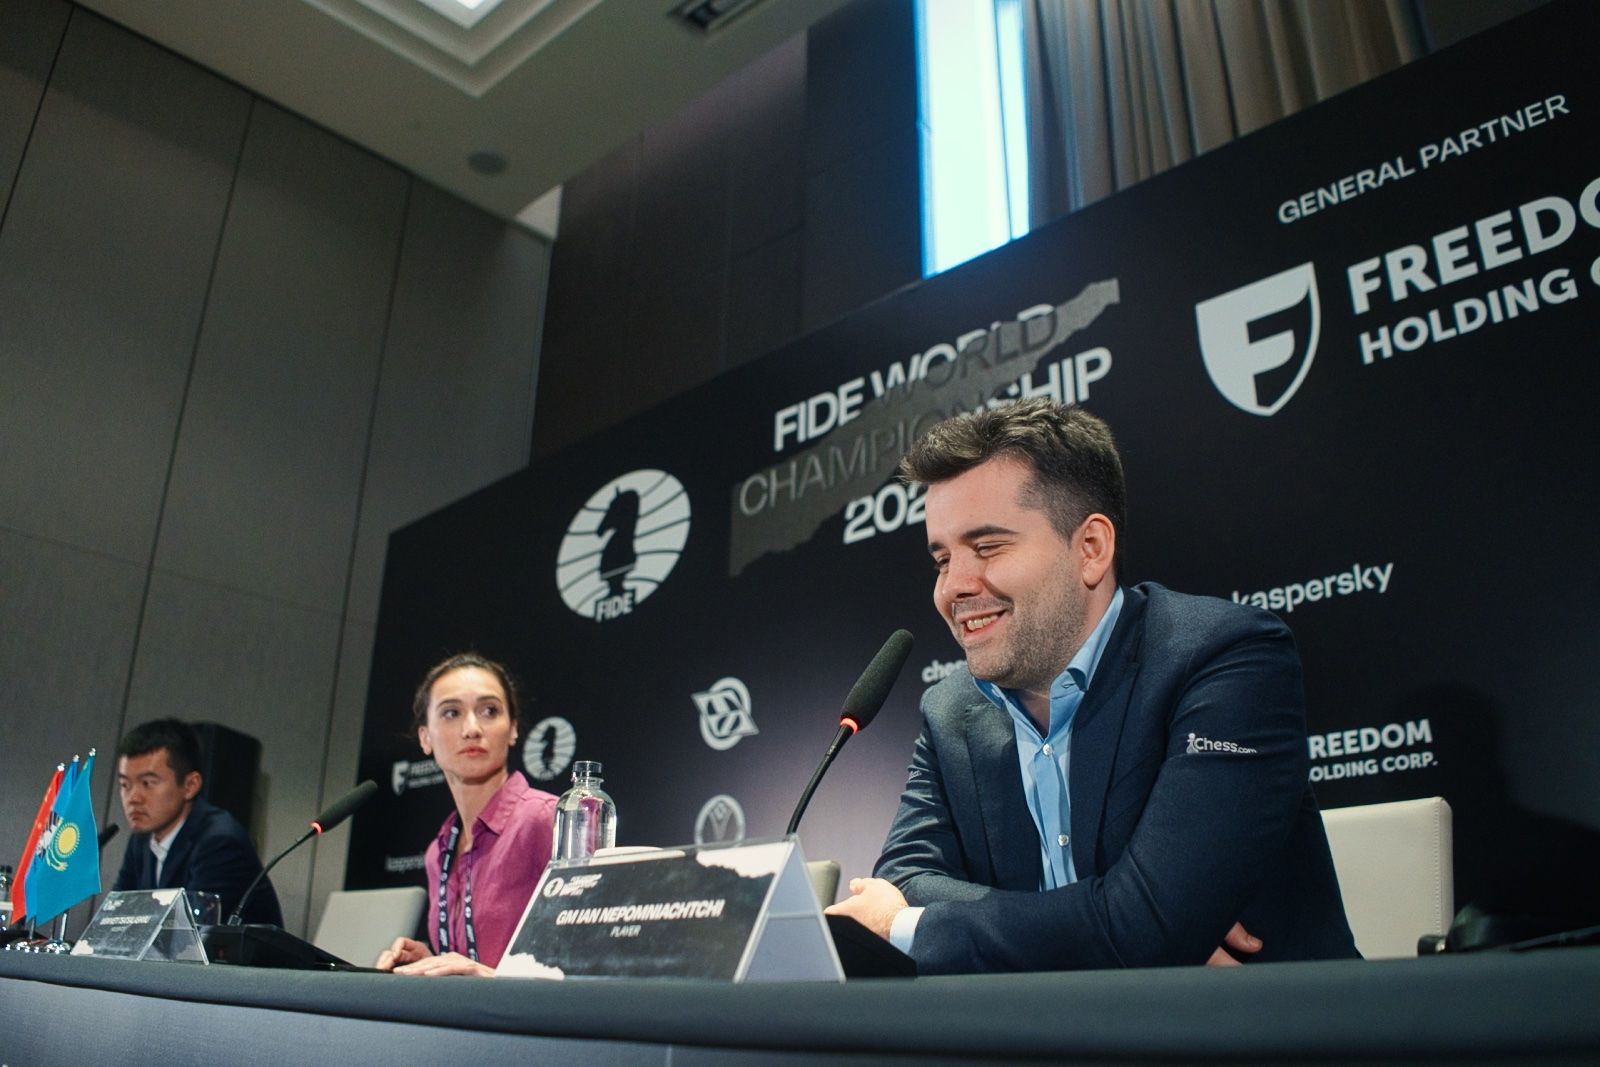 Chess: Ding and Nepomniachtchi go to the wire as speed shootout looms, World Chess Championship 2023